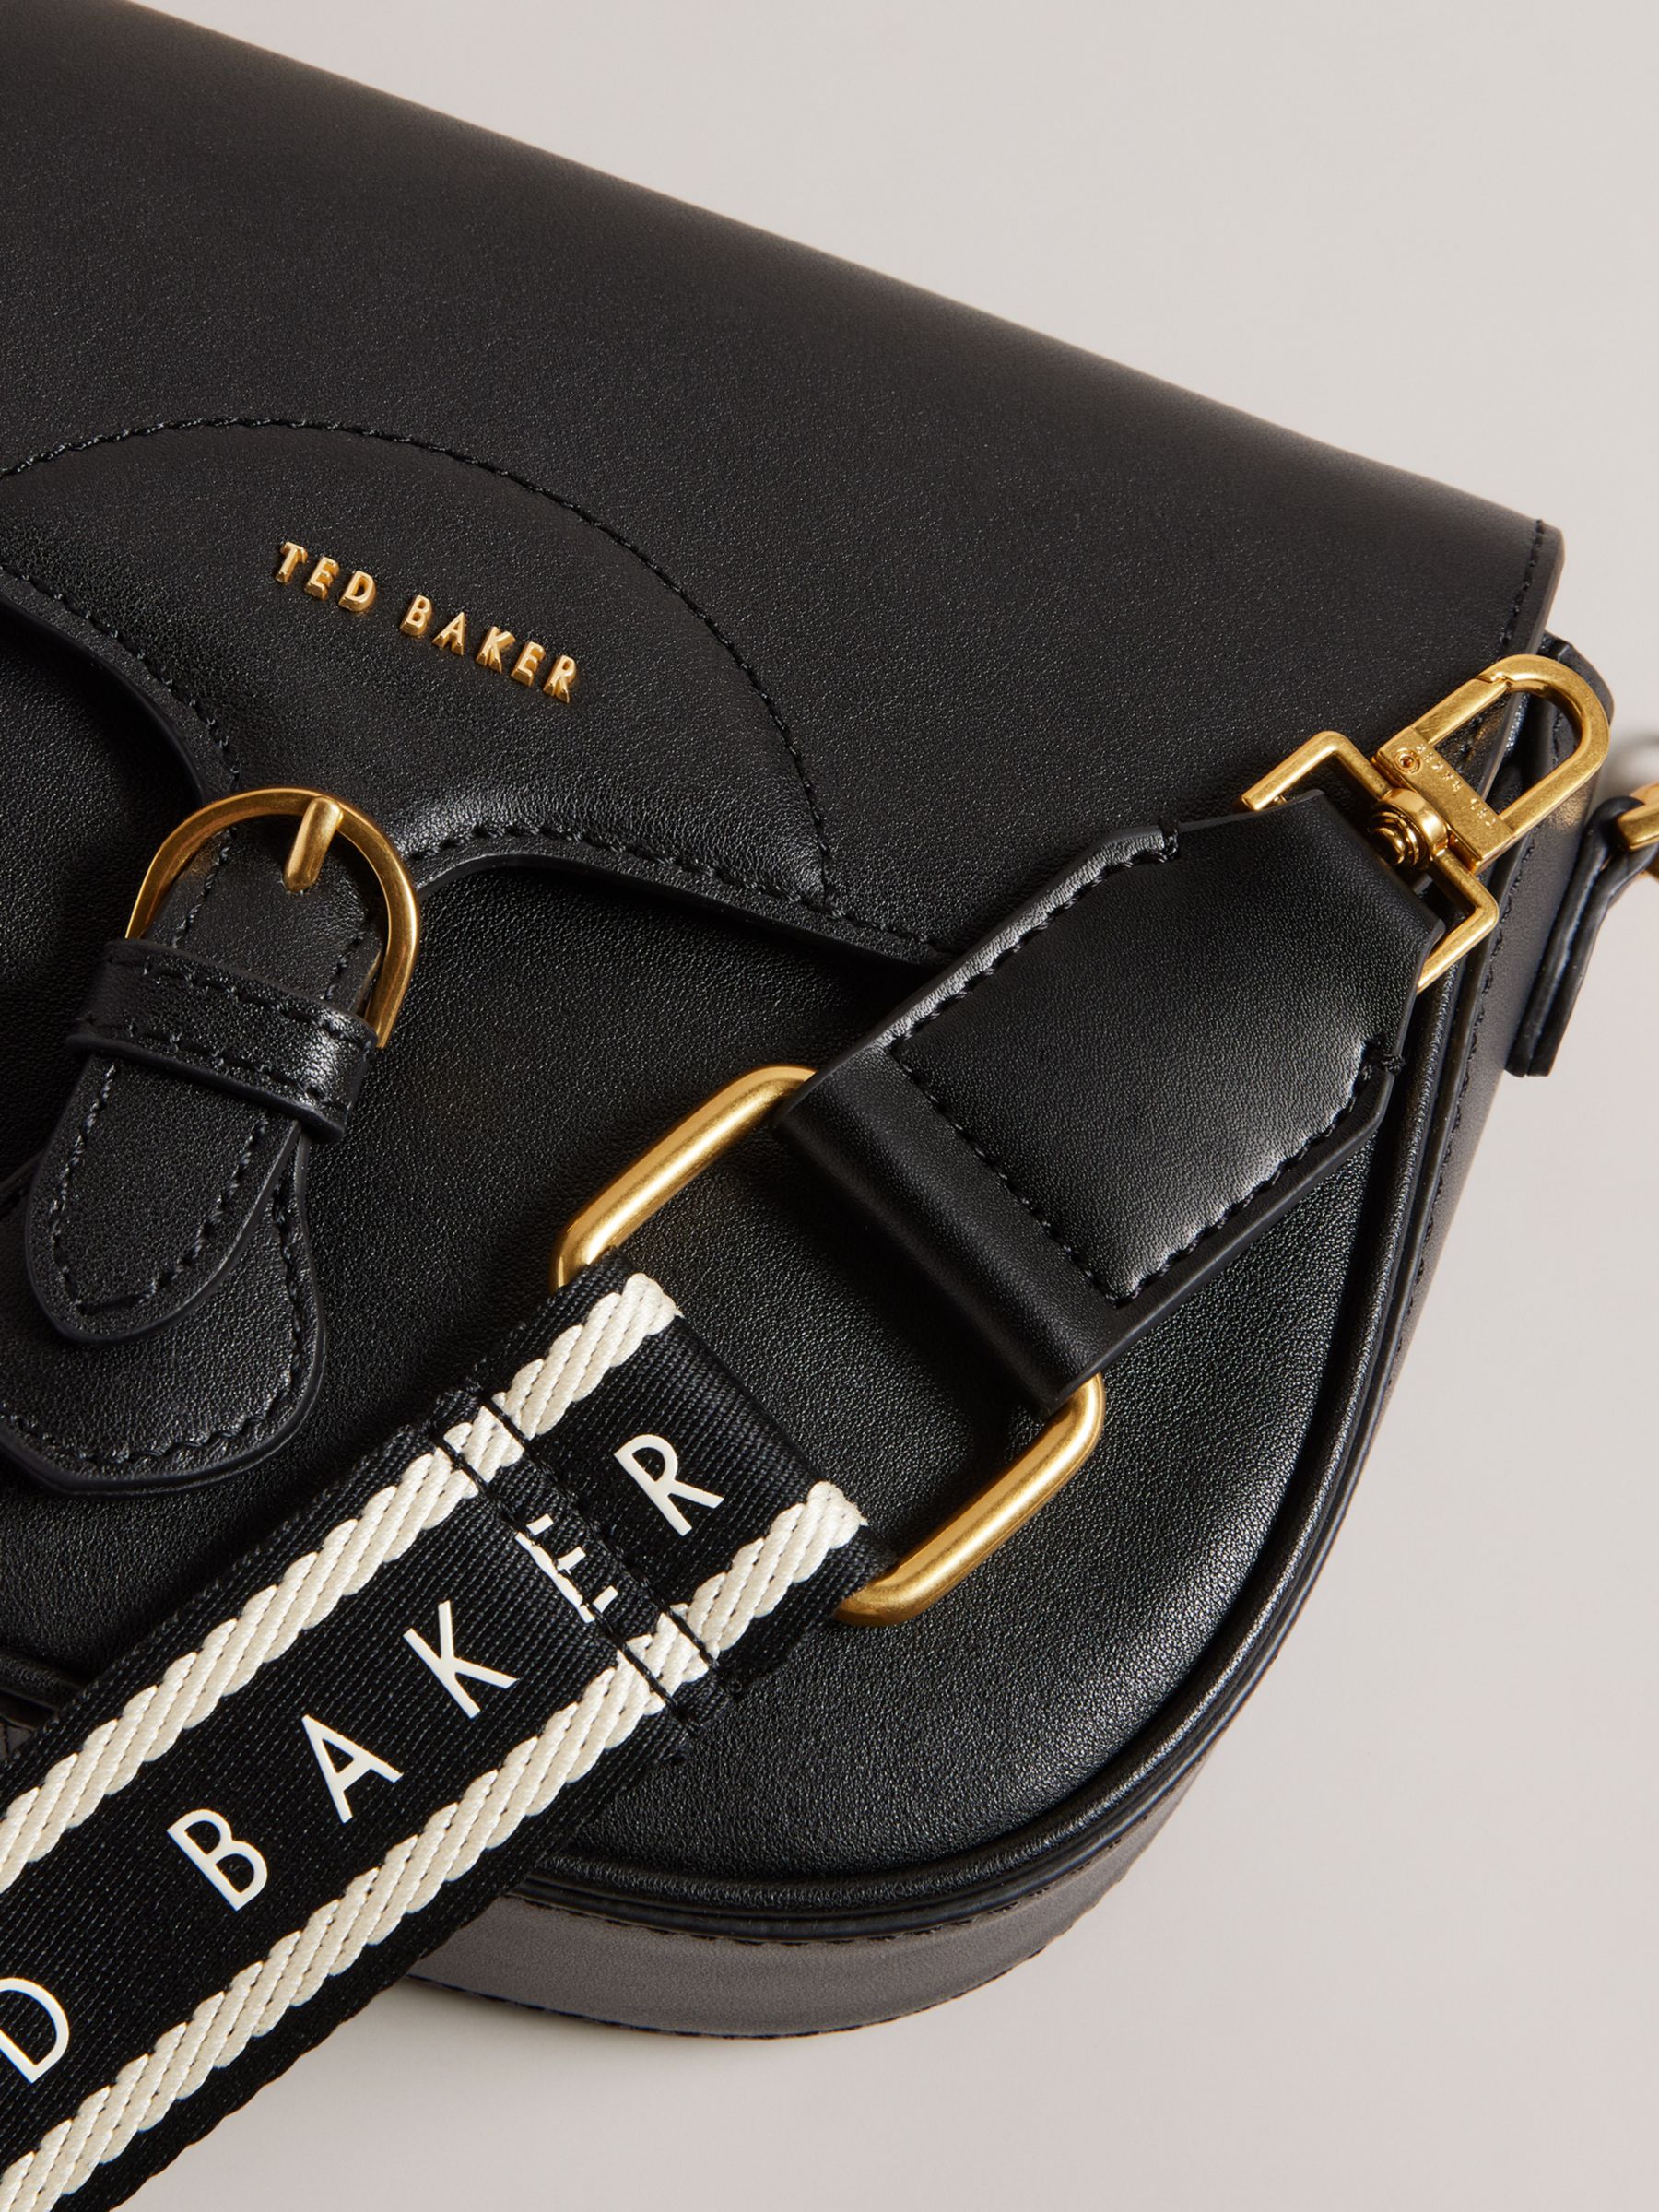 Ted Baker Esia Leather Cross Body Saddle Bag, Black, One Size